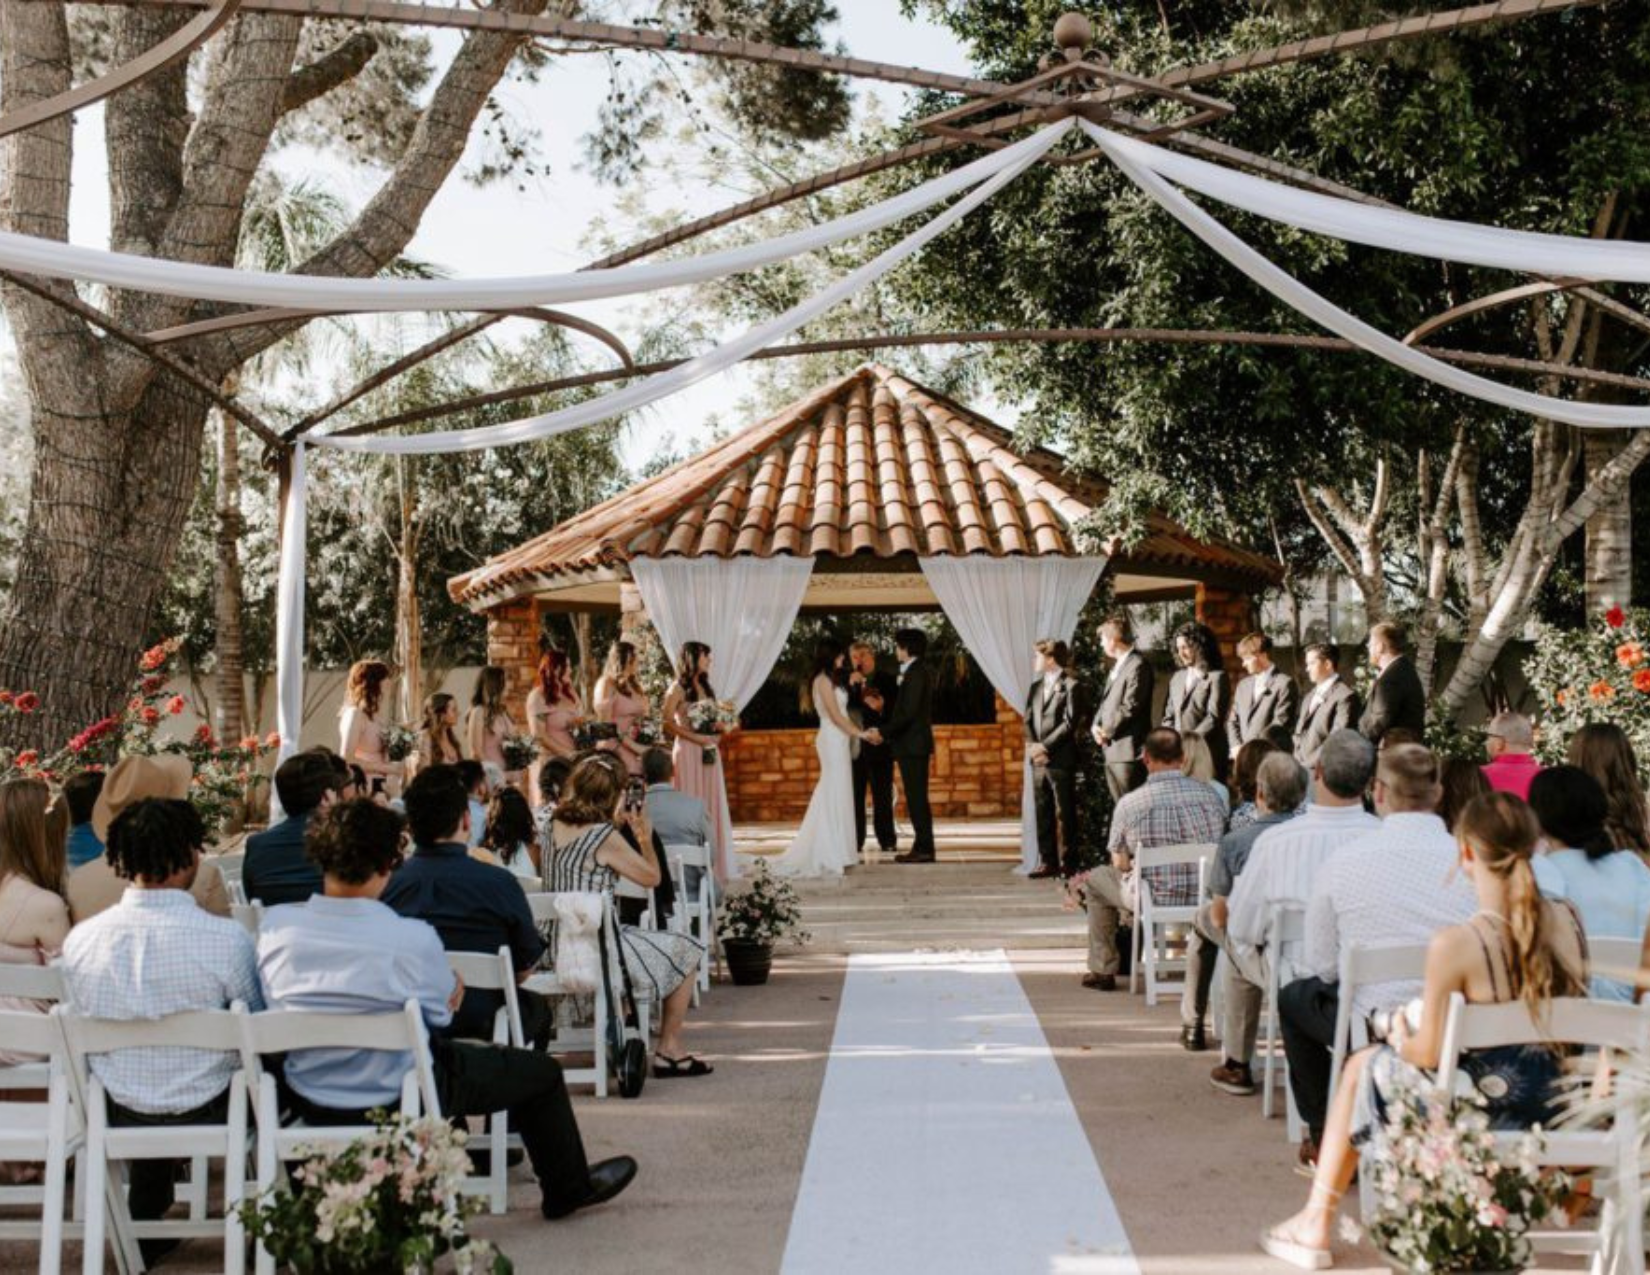 A couple exchanging their wedding vows in front of family at a dreamy outdoor wedding in Chandler, Arizona